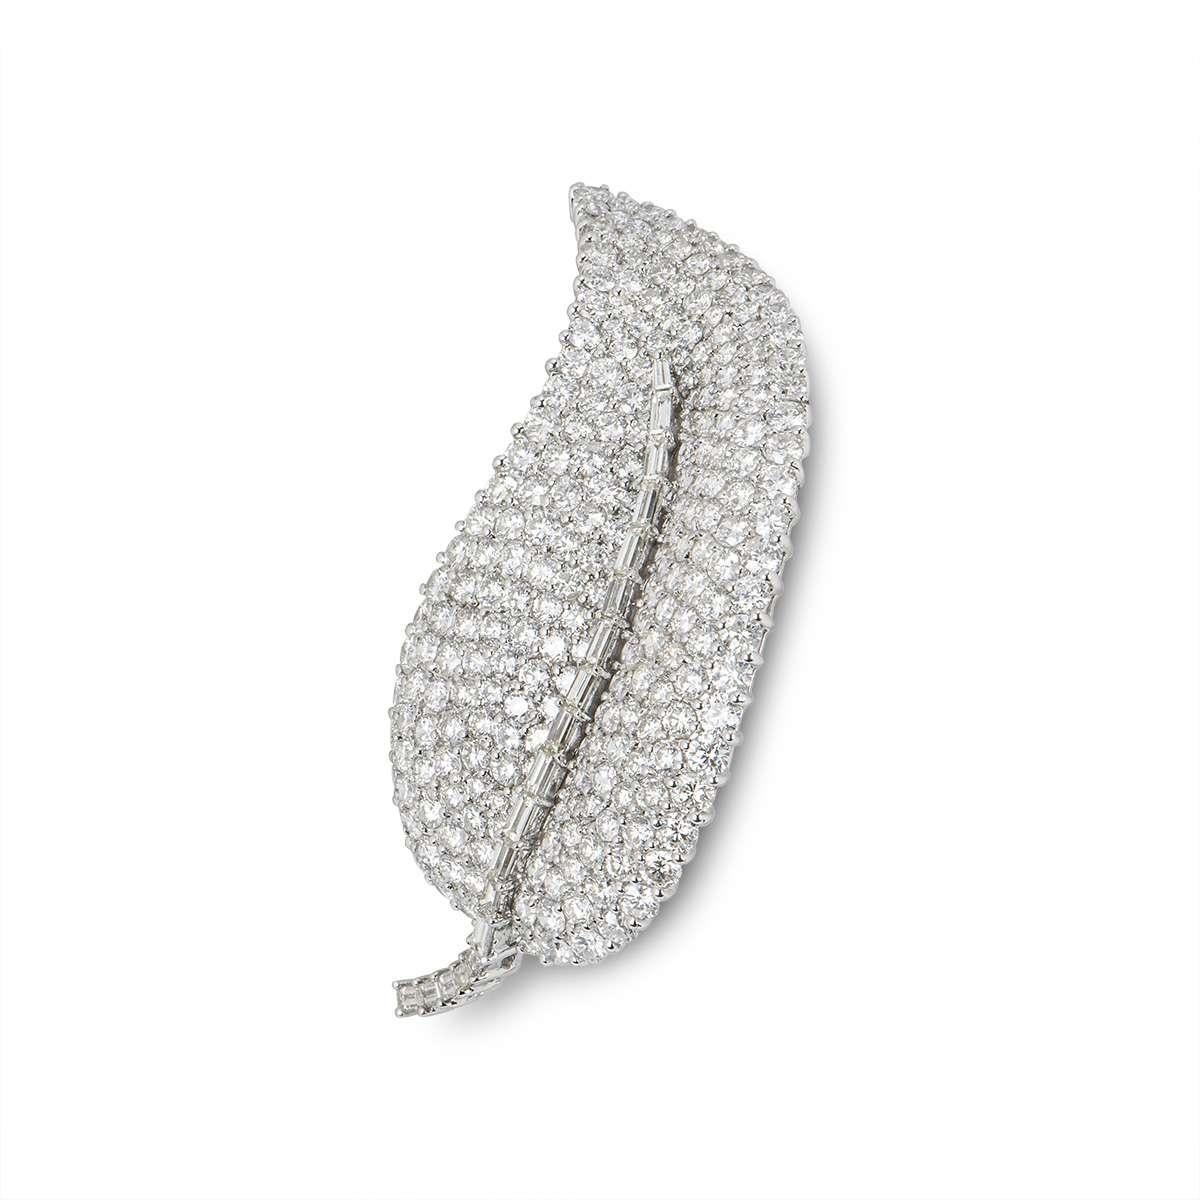 An 18k white gold diamond set leaf brooch. The body of the brooch is composed of round brilliant cut diamonds, each individually claw set, accentuated by the stem composed of claw set baguette cut diamonds. The diamonds total approximately